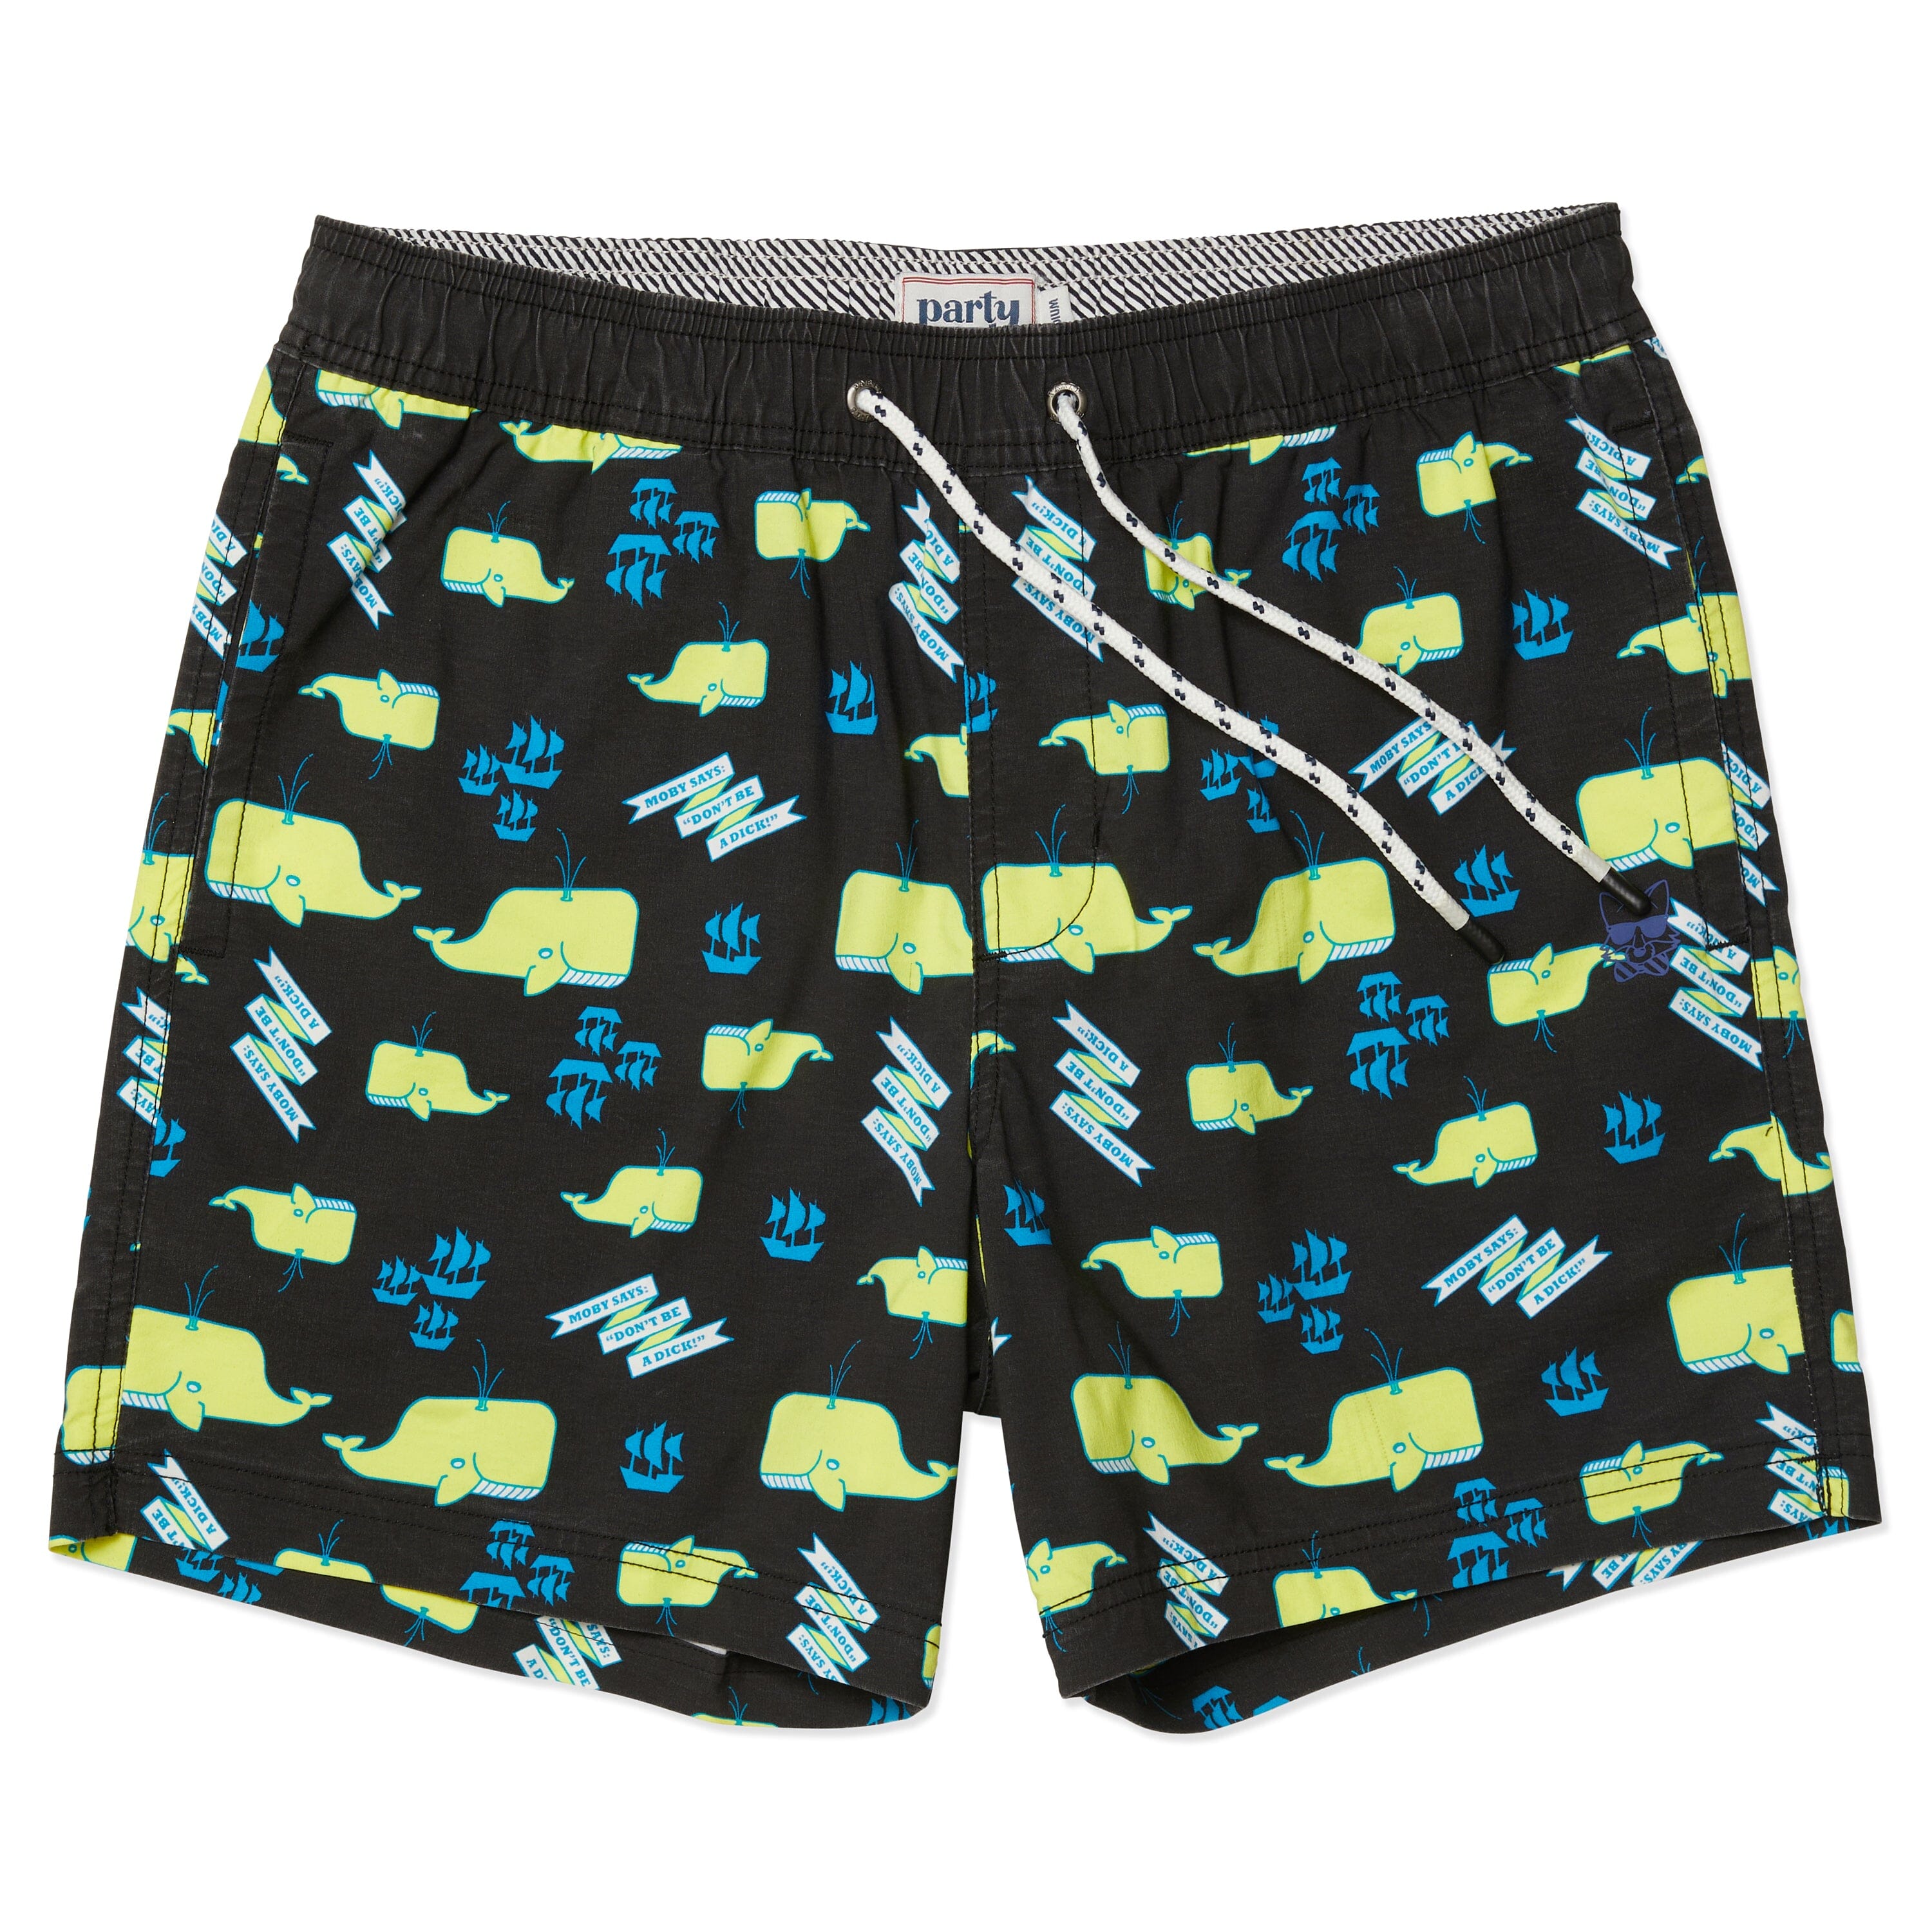 MOBY PARTY STARTER SHORT - BLACK PRINTED SHORTS PARTY PANTS 